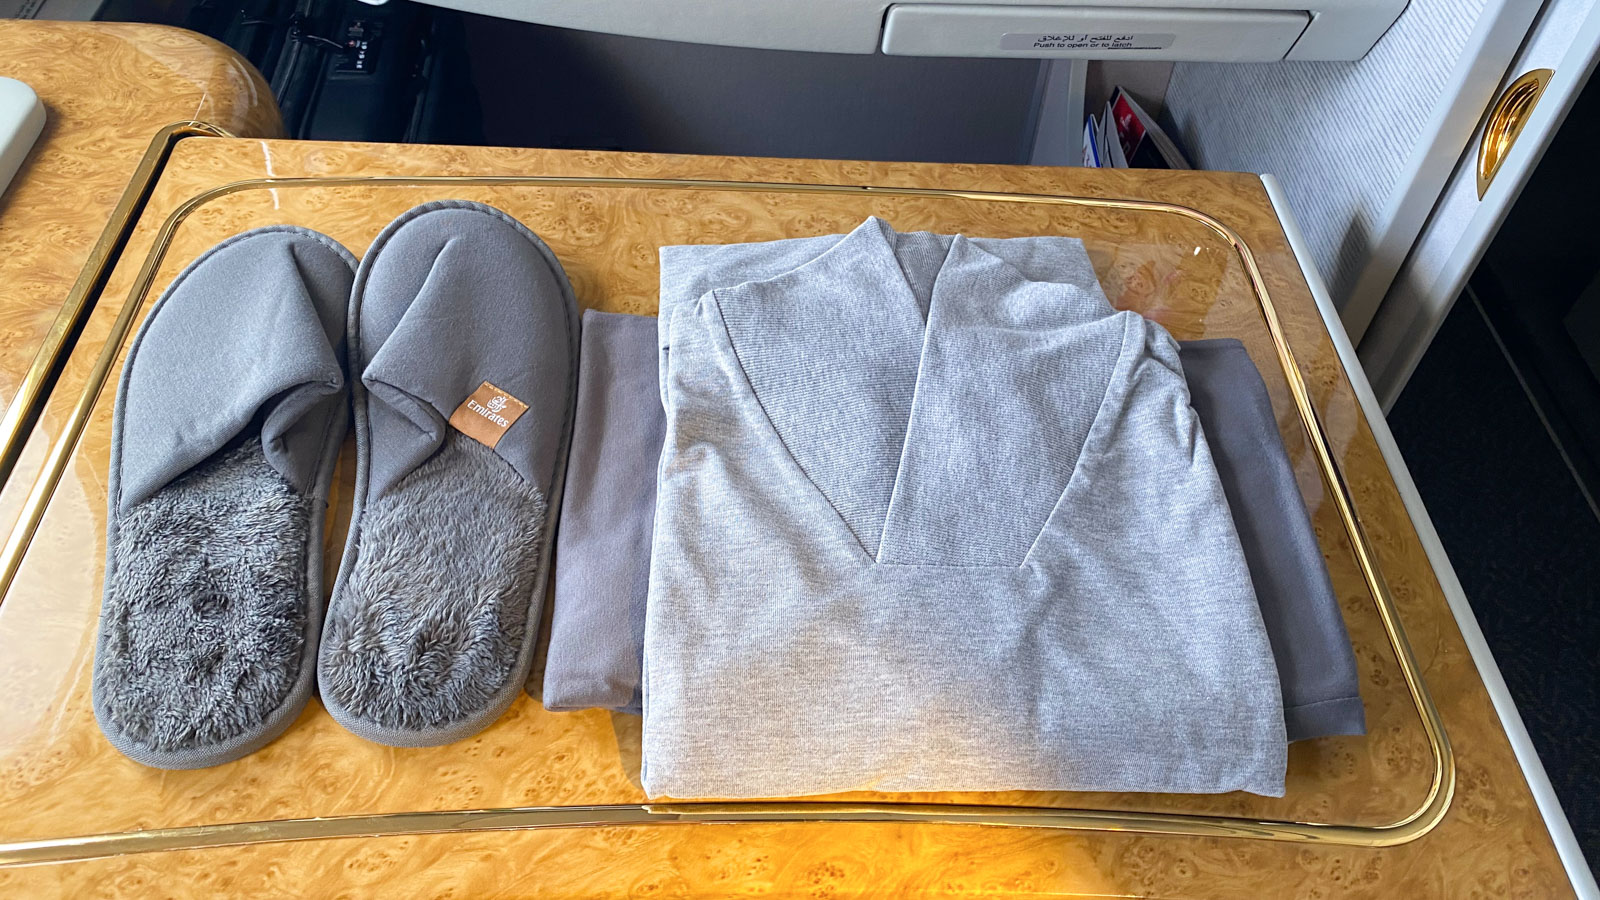 Emirates First Class slippers and pyjamas